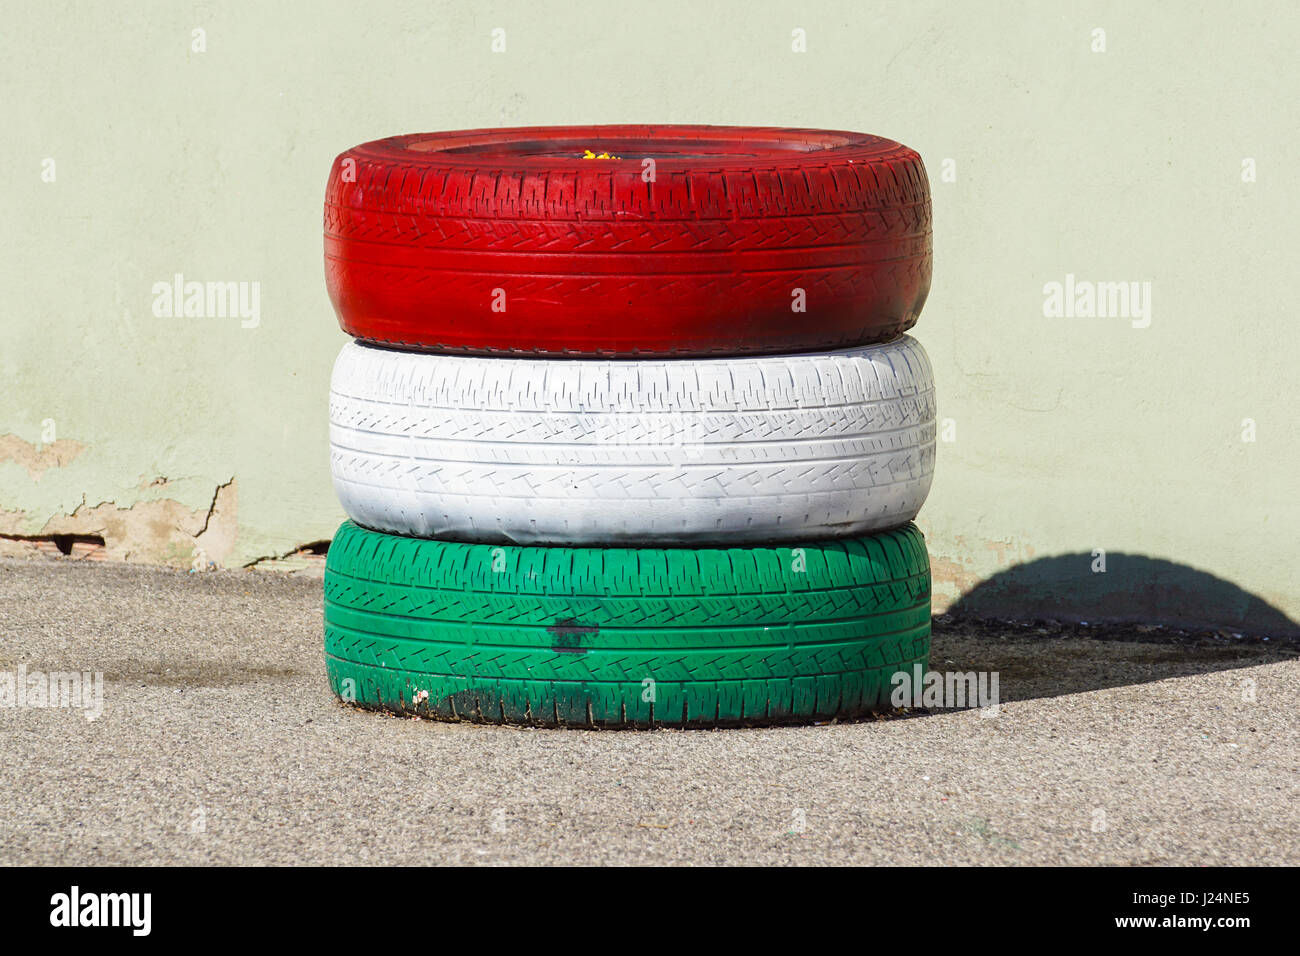 Tires turnovers . shock-proof tires with red and white green colors Stock Photo